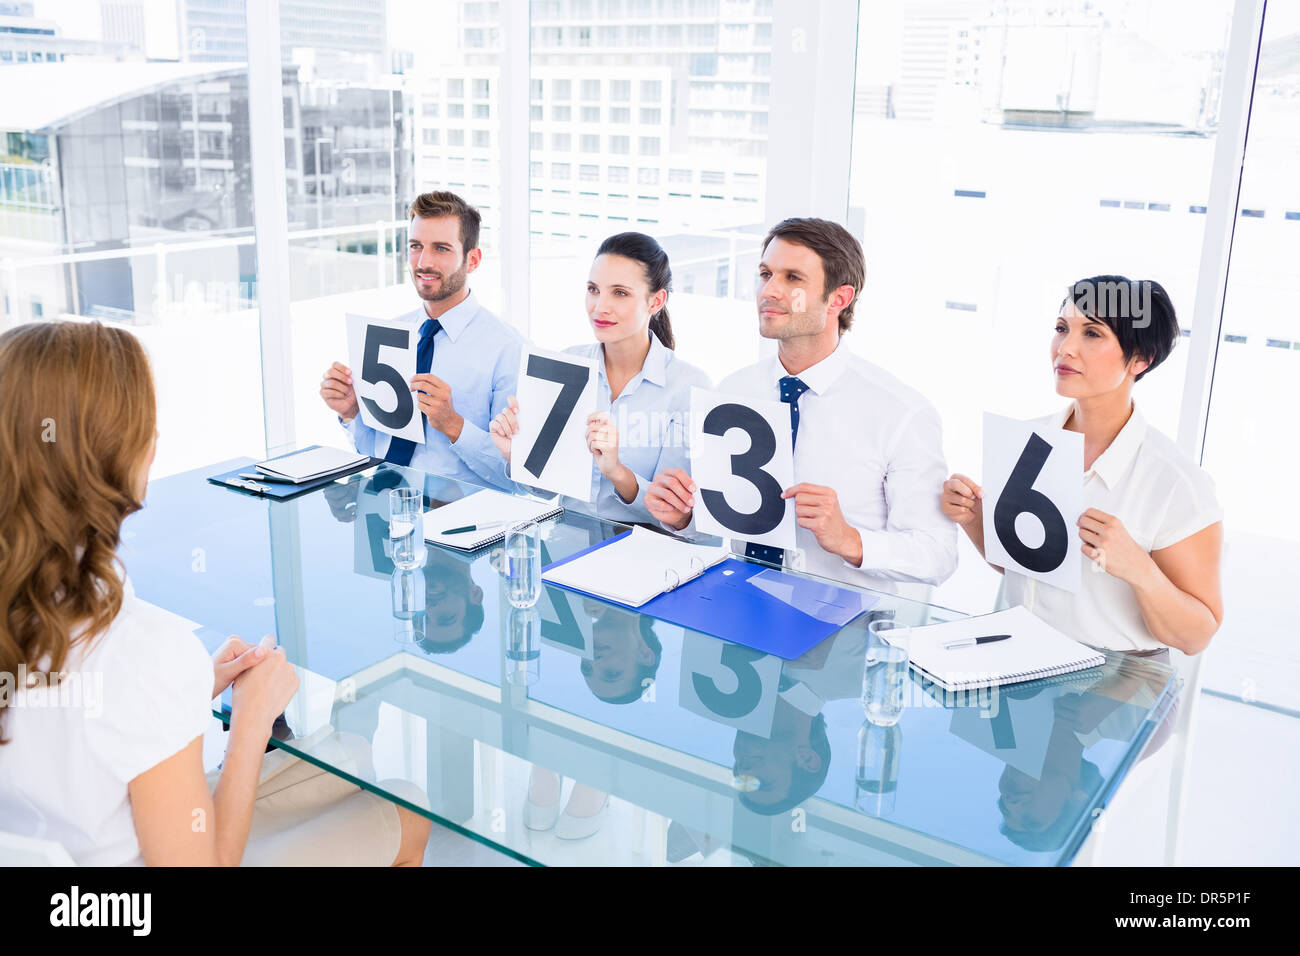 Group of panel judges holding score signs in front of woman Stock Photo